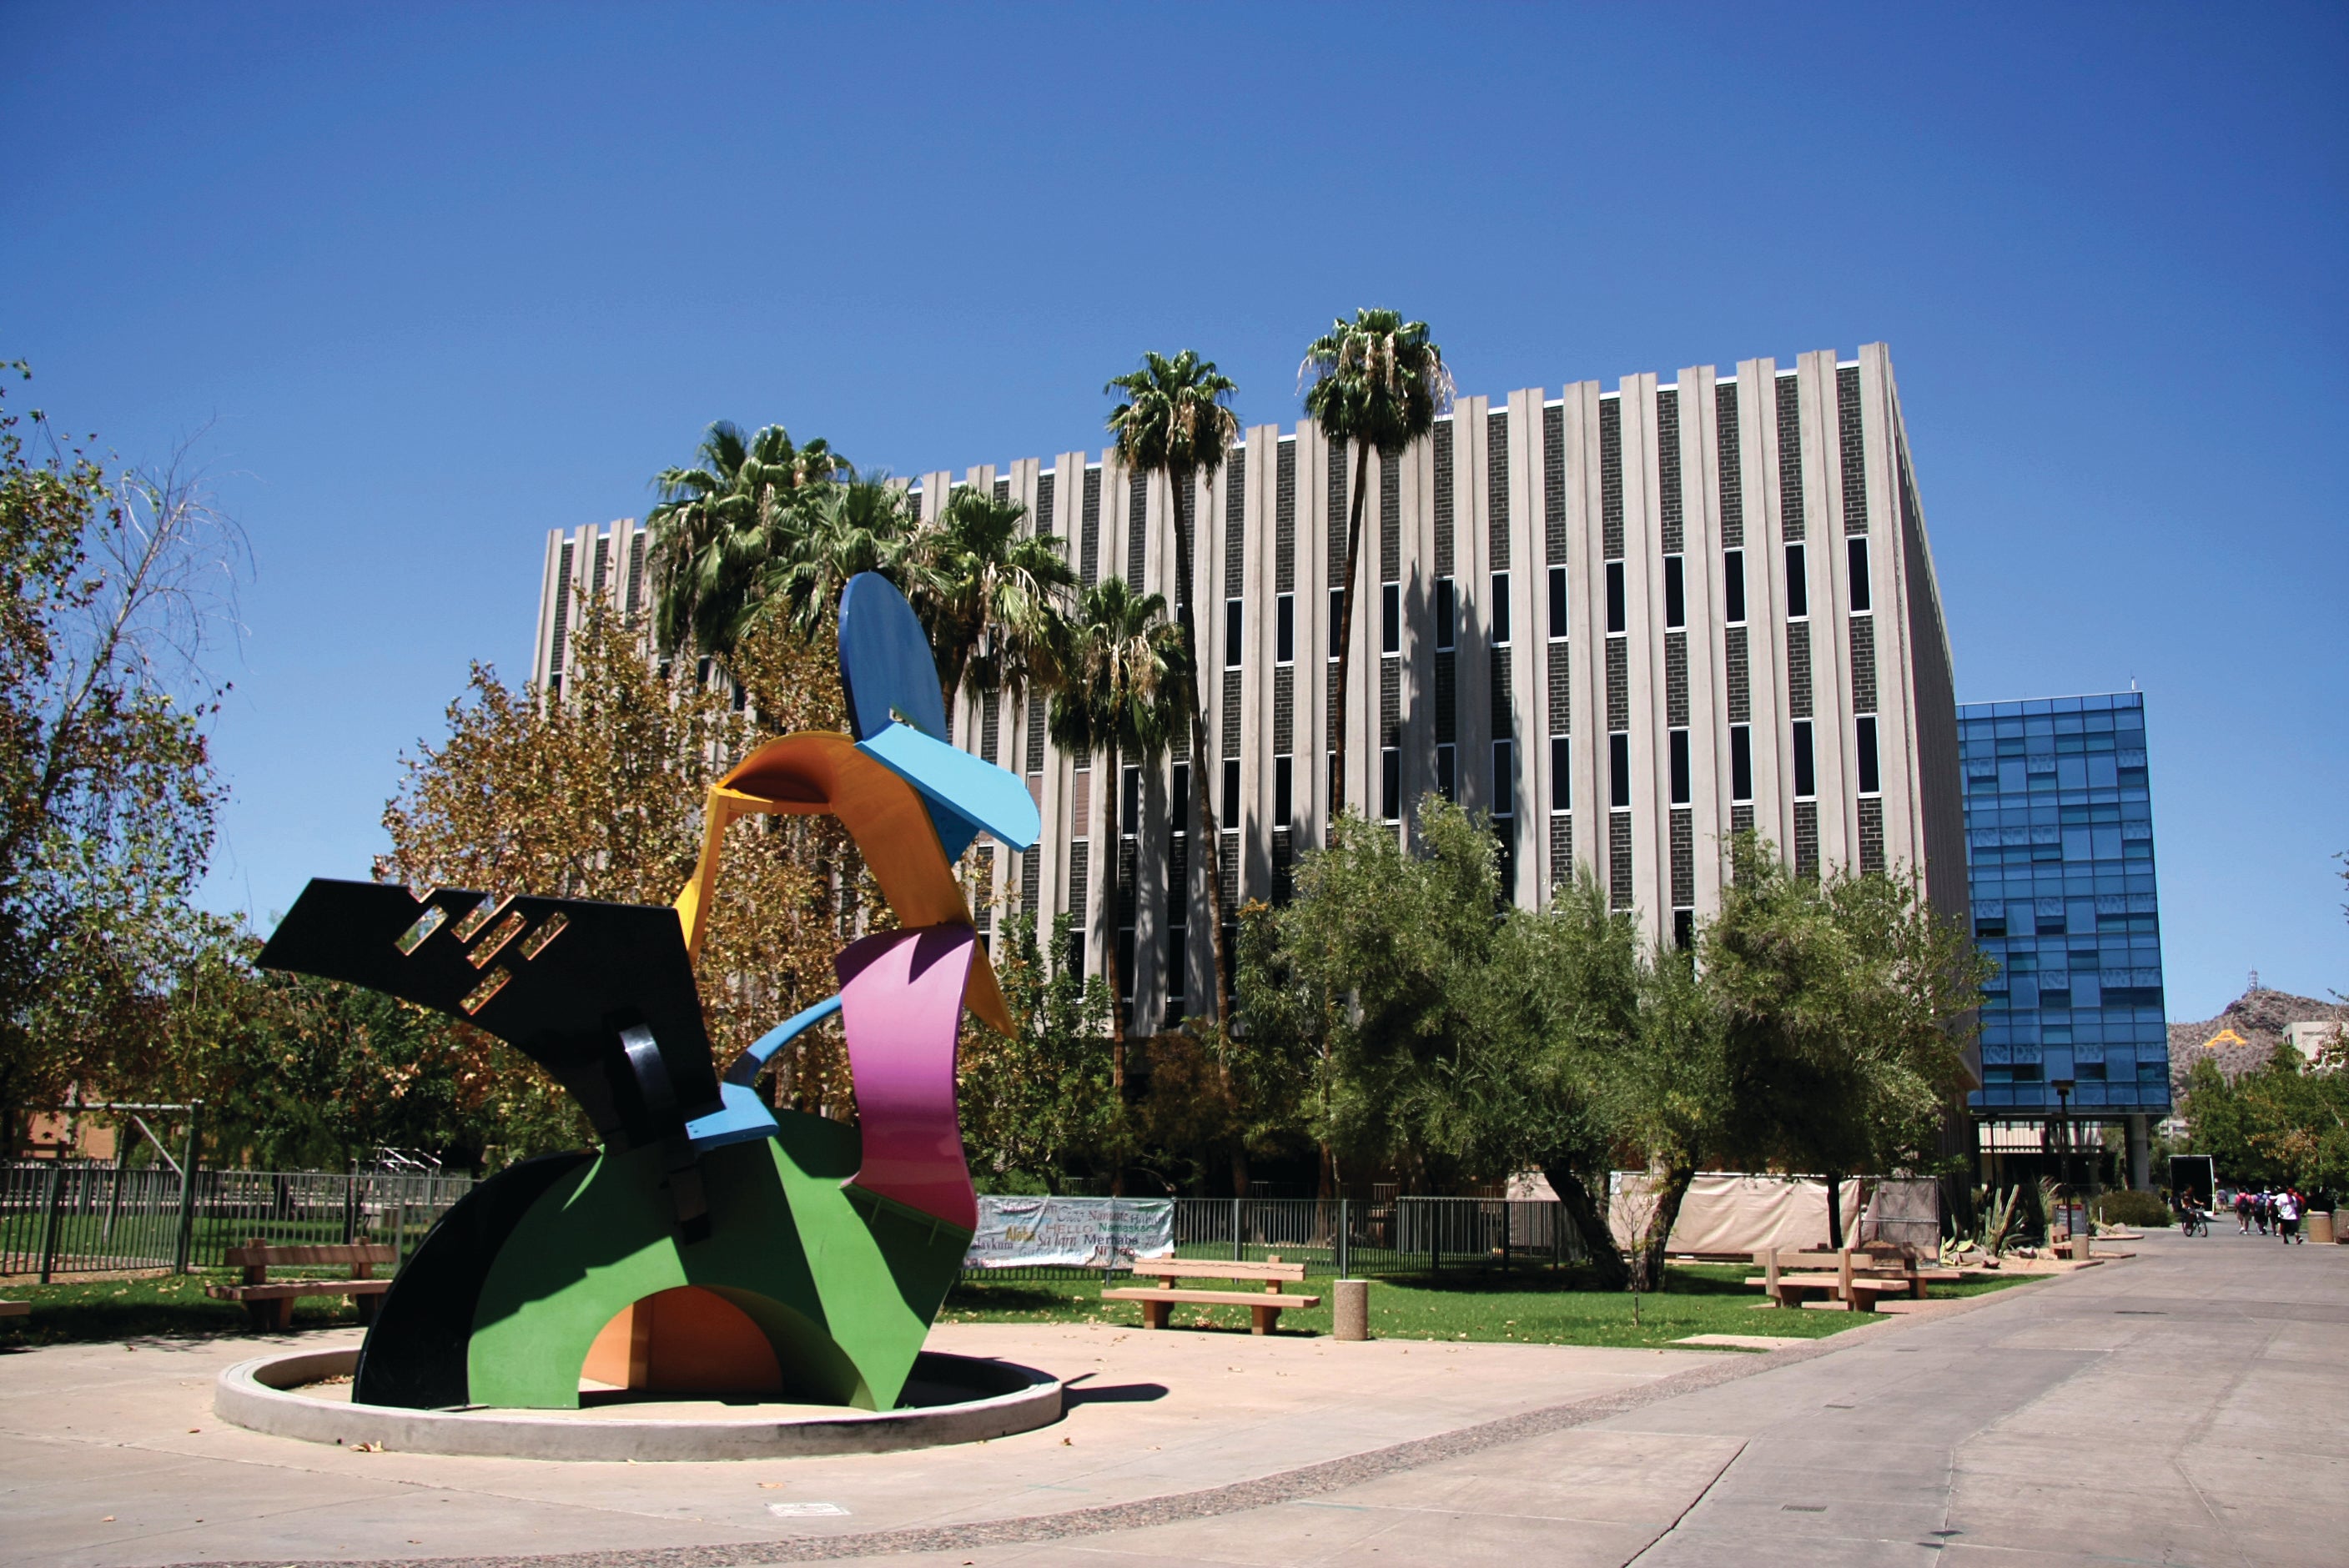 A colorful art sculpture sits in front of Payne Hall, a multi-story building 